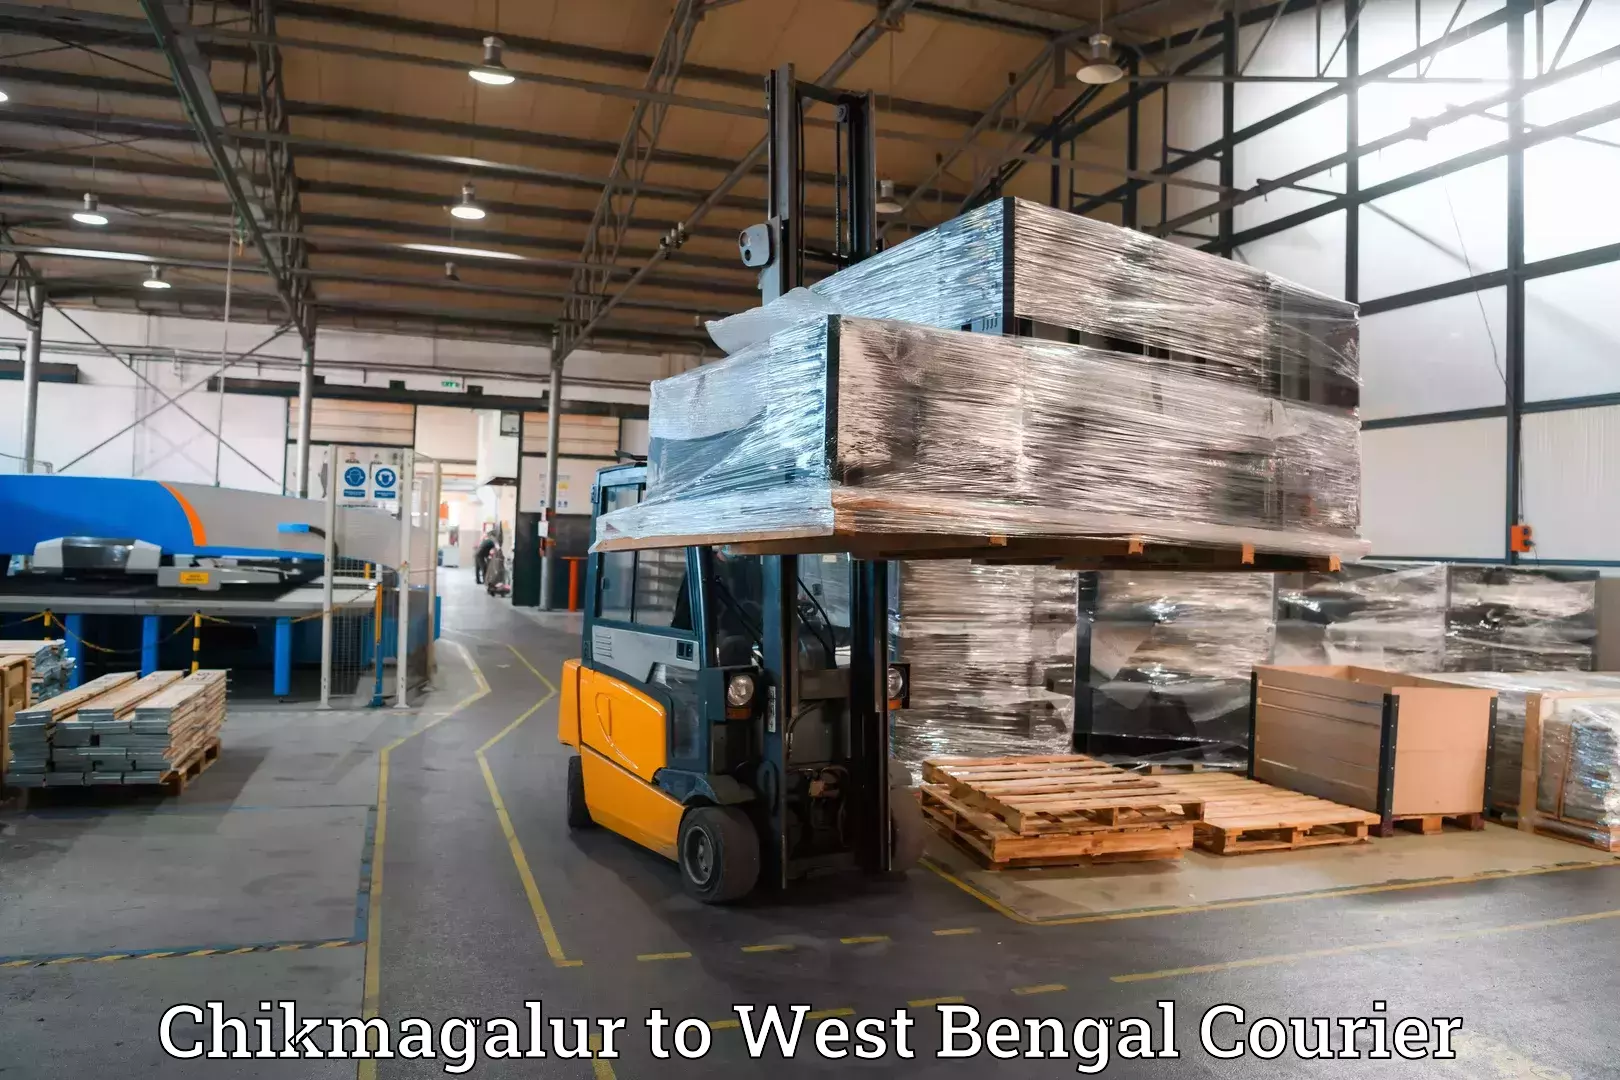 Luggage shipping specialists Chikmagalur to Kolkata Port